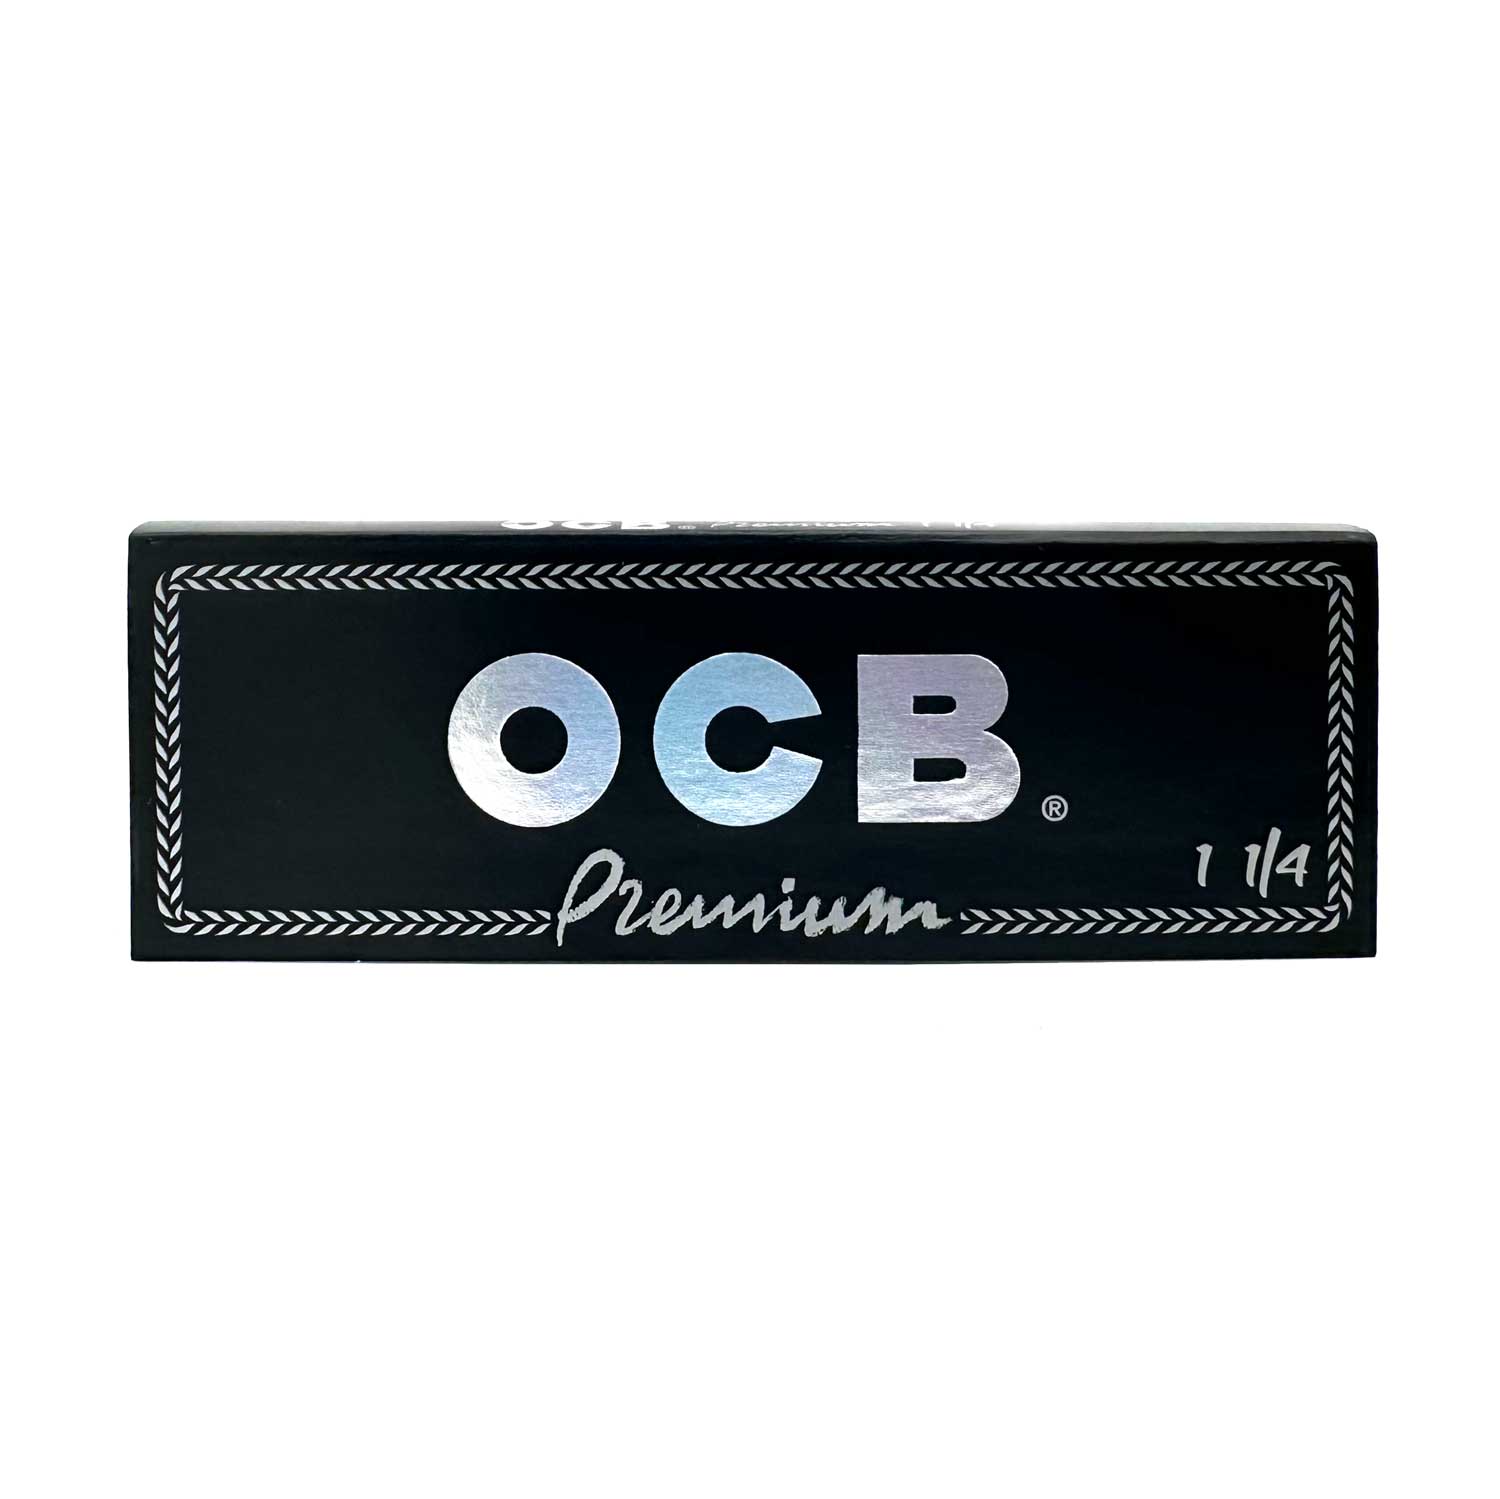  1 box - OCB Single Premium No1 rolling paper regular size 70mm  - 2500 papers : Health & Household